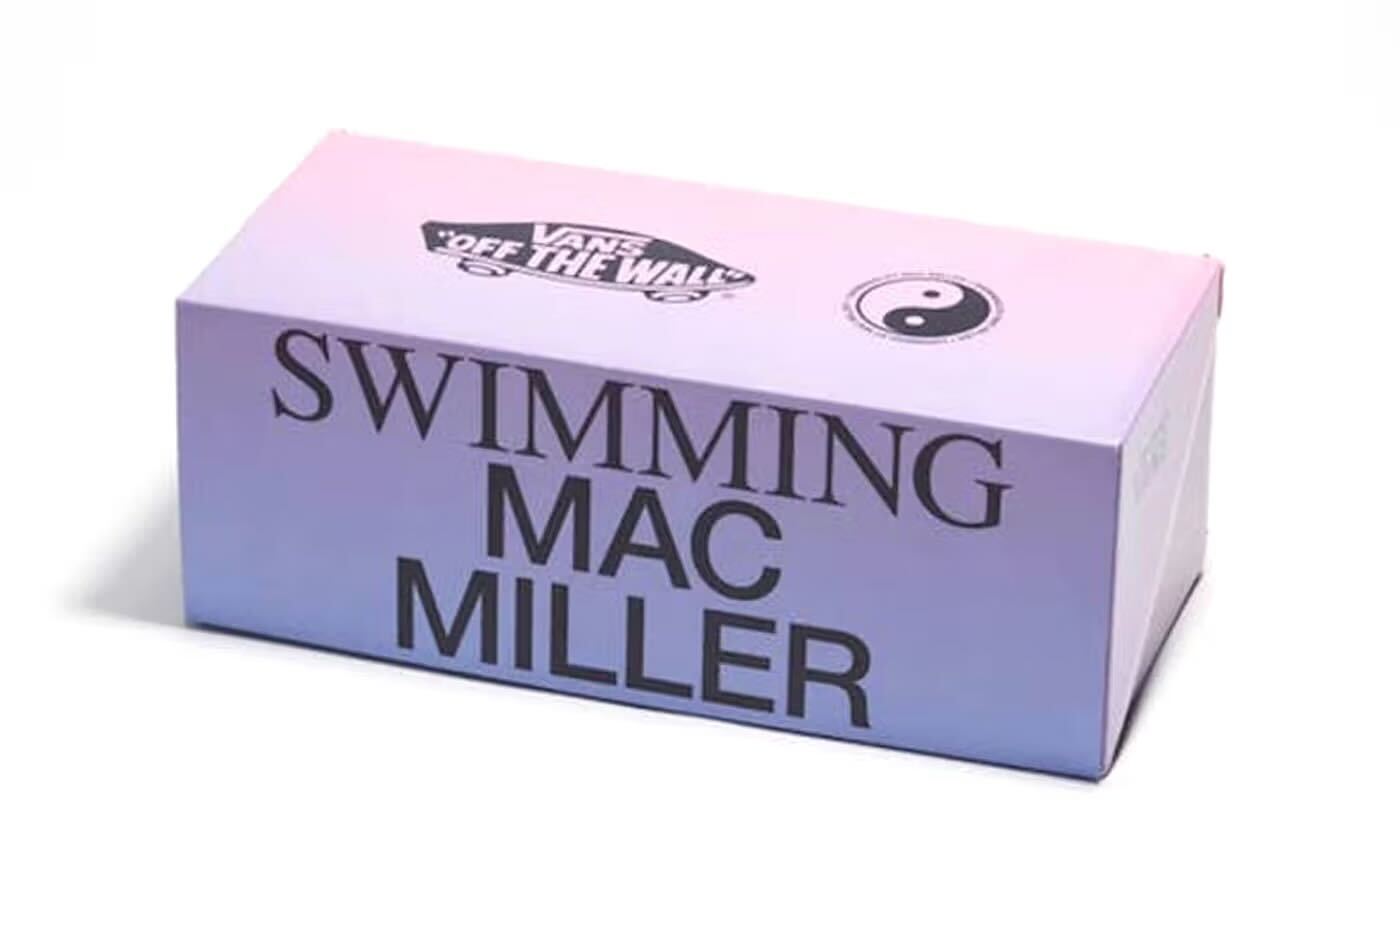 Vans launched some sneakers to honor Mac Miller's 'Swimming' (and here we tell you how to put them together)